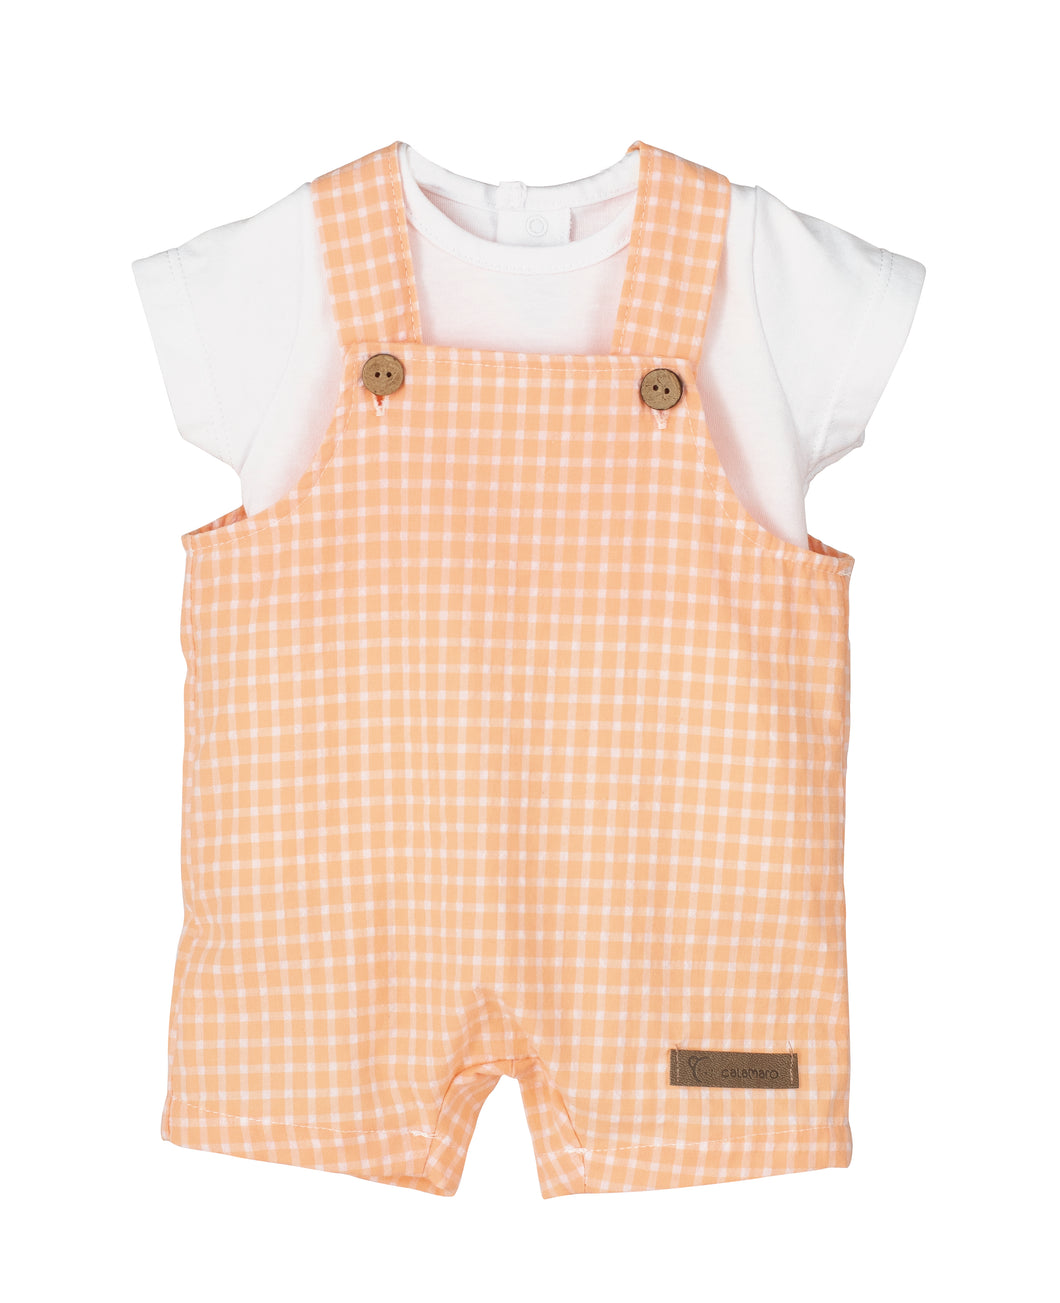 PRE ORDER - NEW SS24 Calamaro Boys Peach Checked Dungaree Outfit 17944